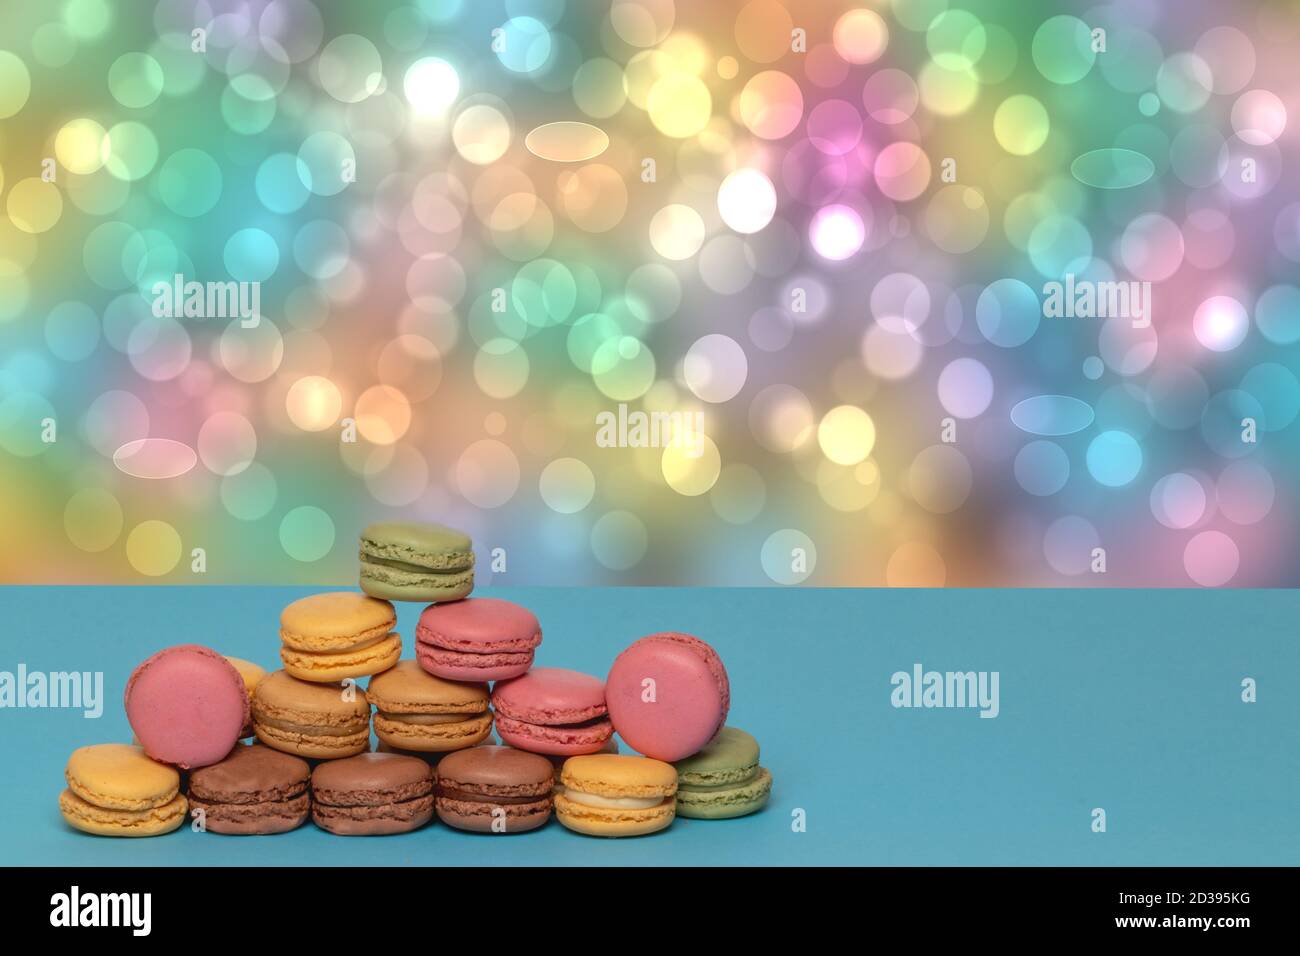 Close-up of colourful French macaroons in shape of a pyramid on a blue table against abstract bright pastel colored background. Advertising bakery or Stock Photo